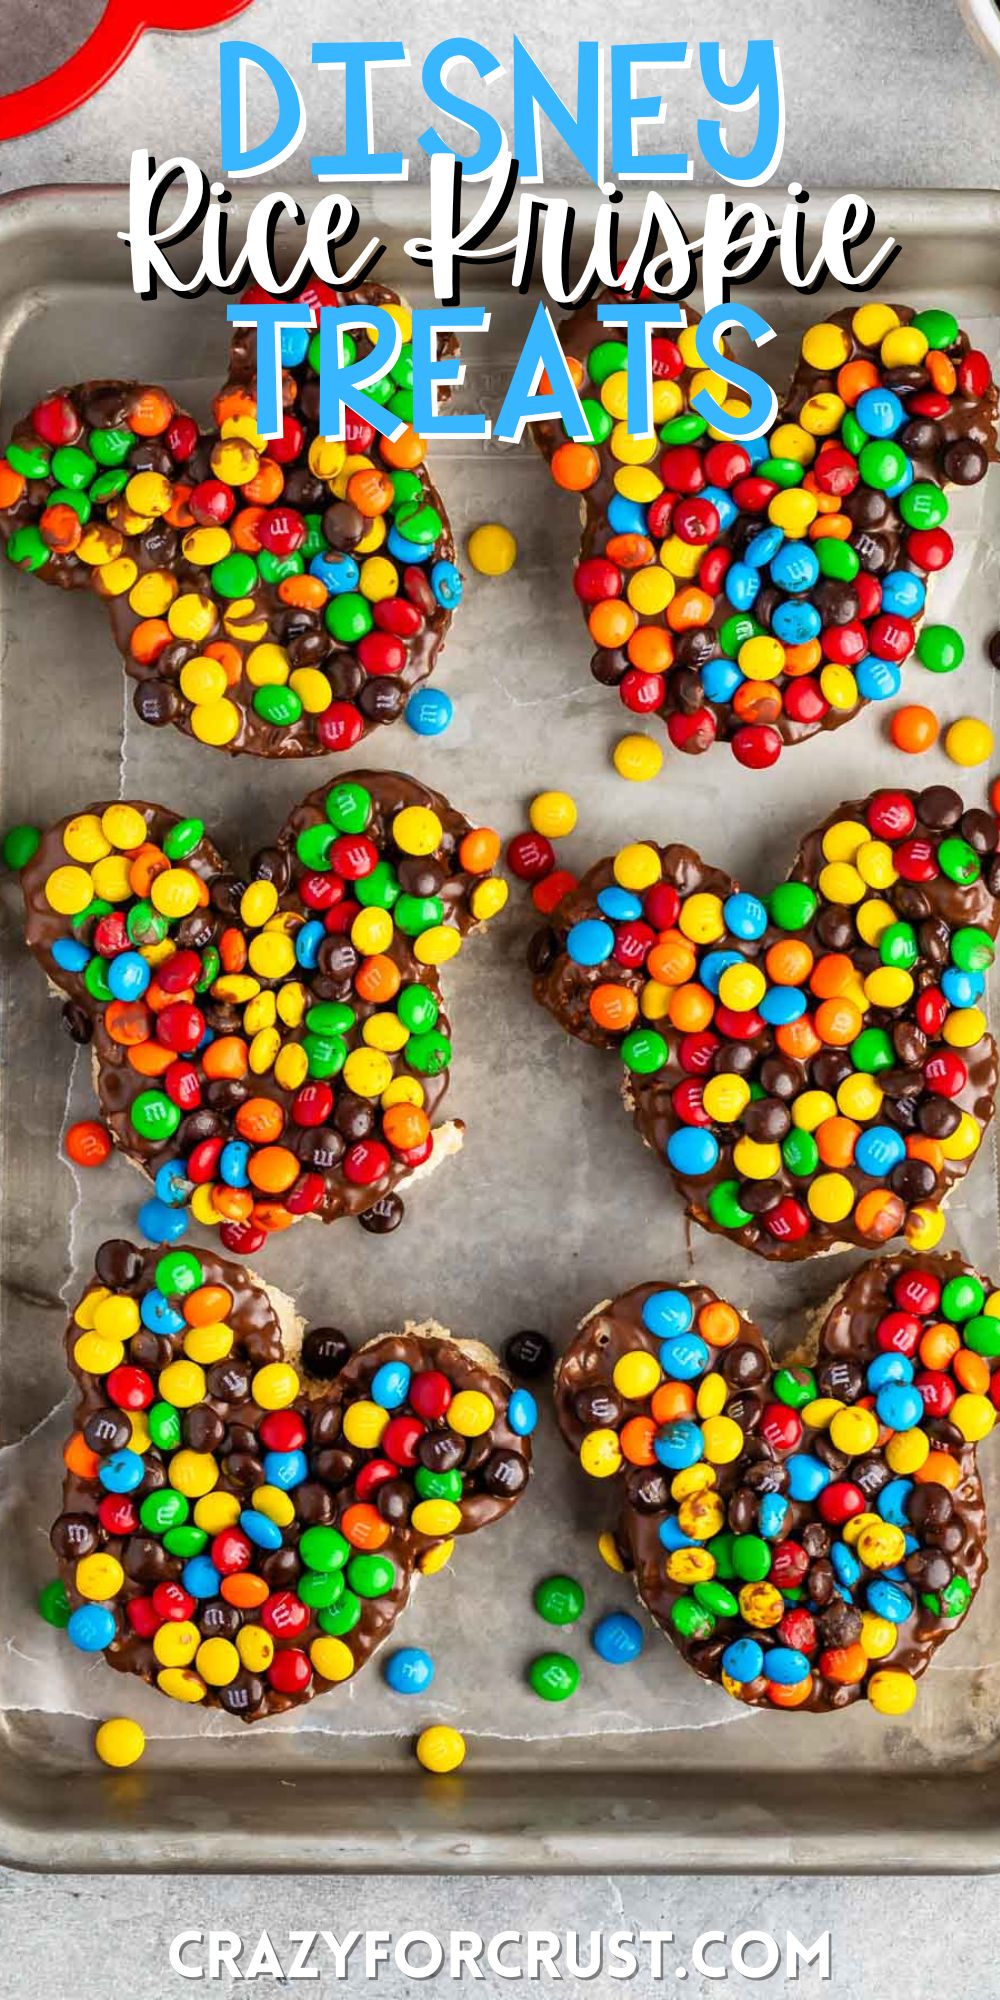 Mickey Mouse shaped Rice Krispie treats covered in chocolate and colorful M&Ms with words on the image.